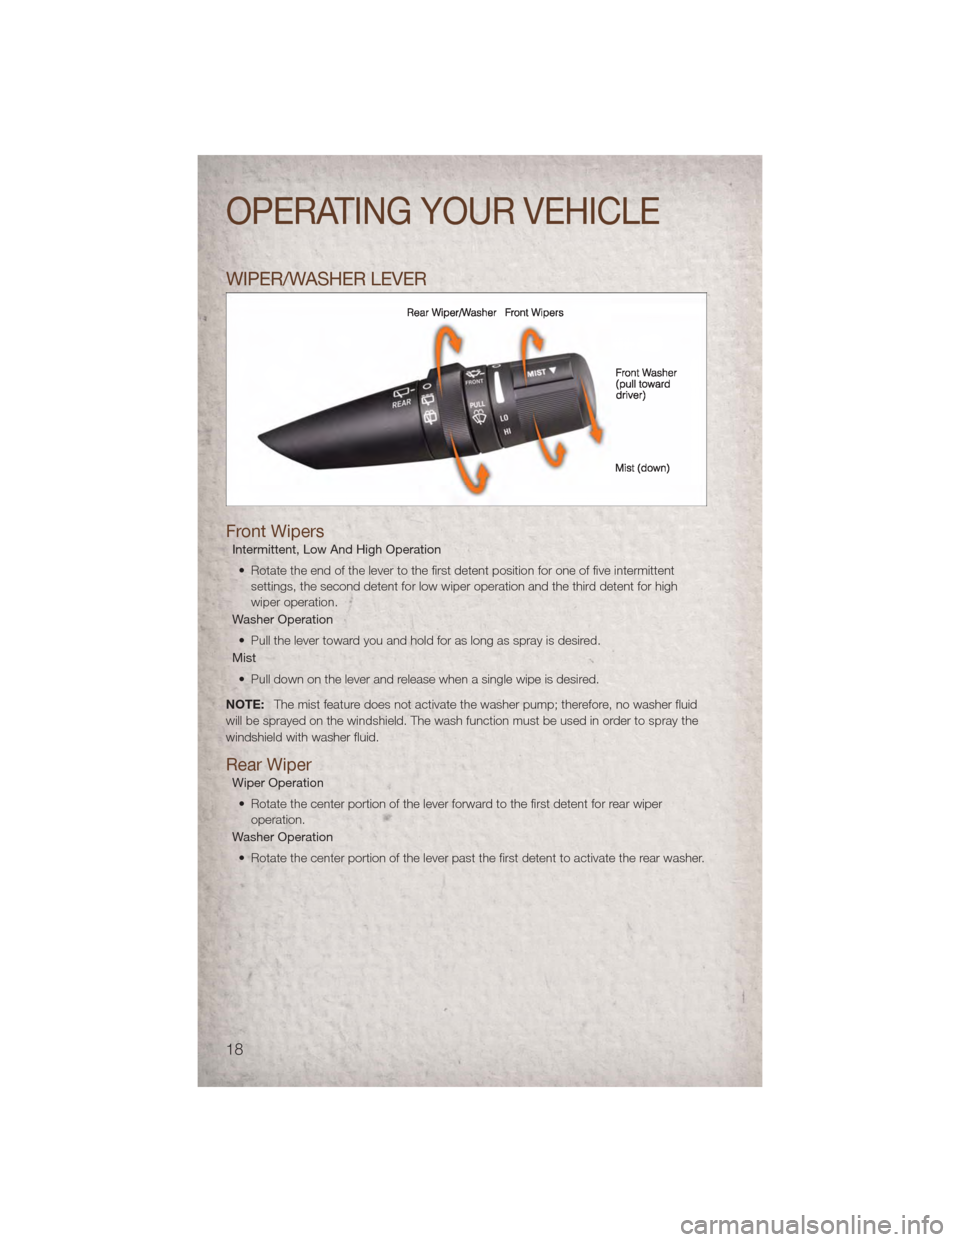 JEEP COMPASS 2011 1.G Owners Manual WIPER/WASHER LEVER
Front Wipers
Intermittent, Low And High Operation• Rotate the end of the lever to the first detent position for one of five intermittent settings, the second detent for low wiper 